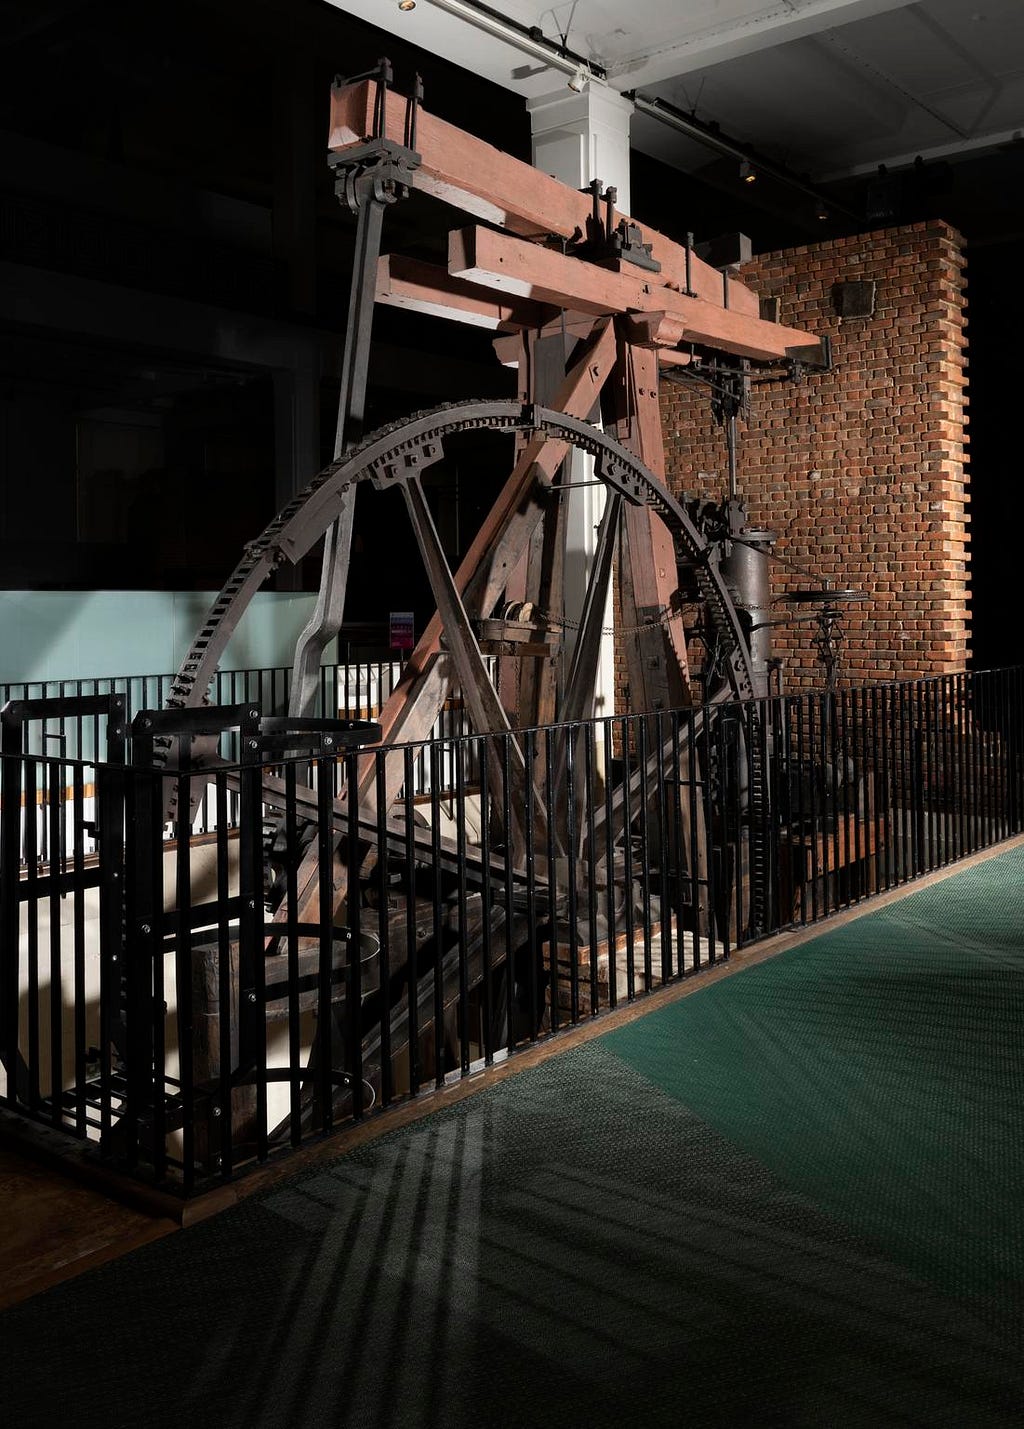 The Boulton and Watt Rotative Beam Engine built by James Watt in 1788. The engine was used at Matthew Boulton’s Soho Manufactory in Birmingham, where it drove 43 metal polishing (or ‘lapping’) machines for 70 years.Science Museum Group. Rotative steam engine by Boulton and Watt, 1788. 1861–46Science Museum Group Collection Online. Accessed May 24, 2023. https://collection.sciencemuseumgroup.org.uk/objects/co50948/rotative-steam-engine-by-boulton-and-watt-1788-beam-engine-steam-engine.